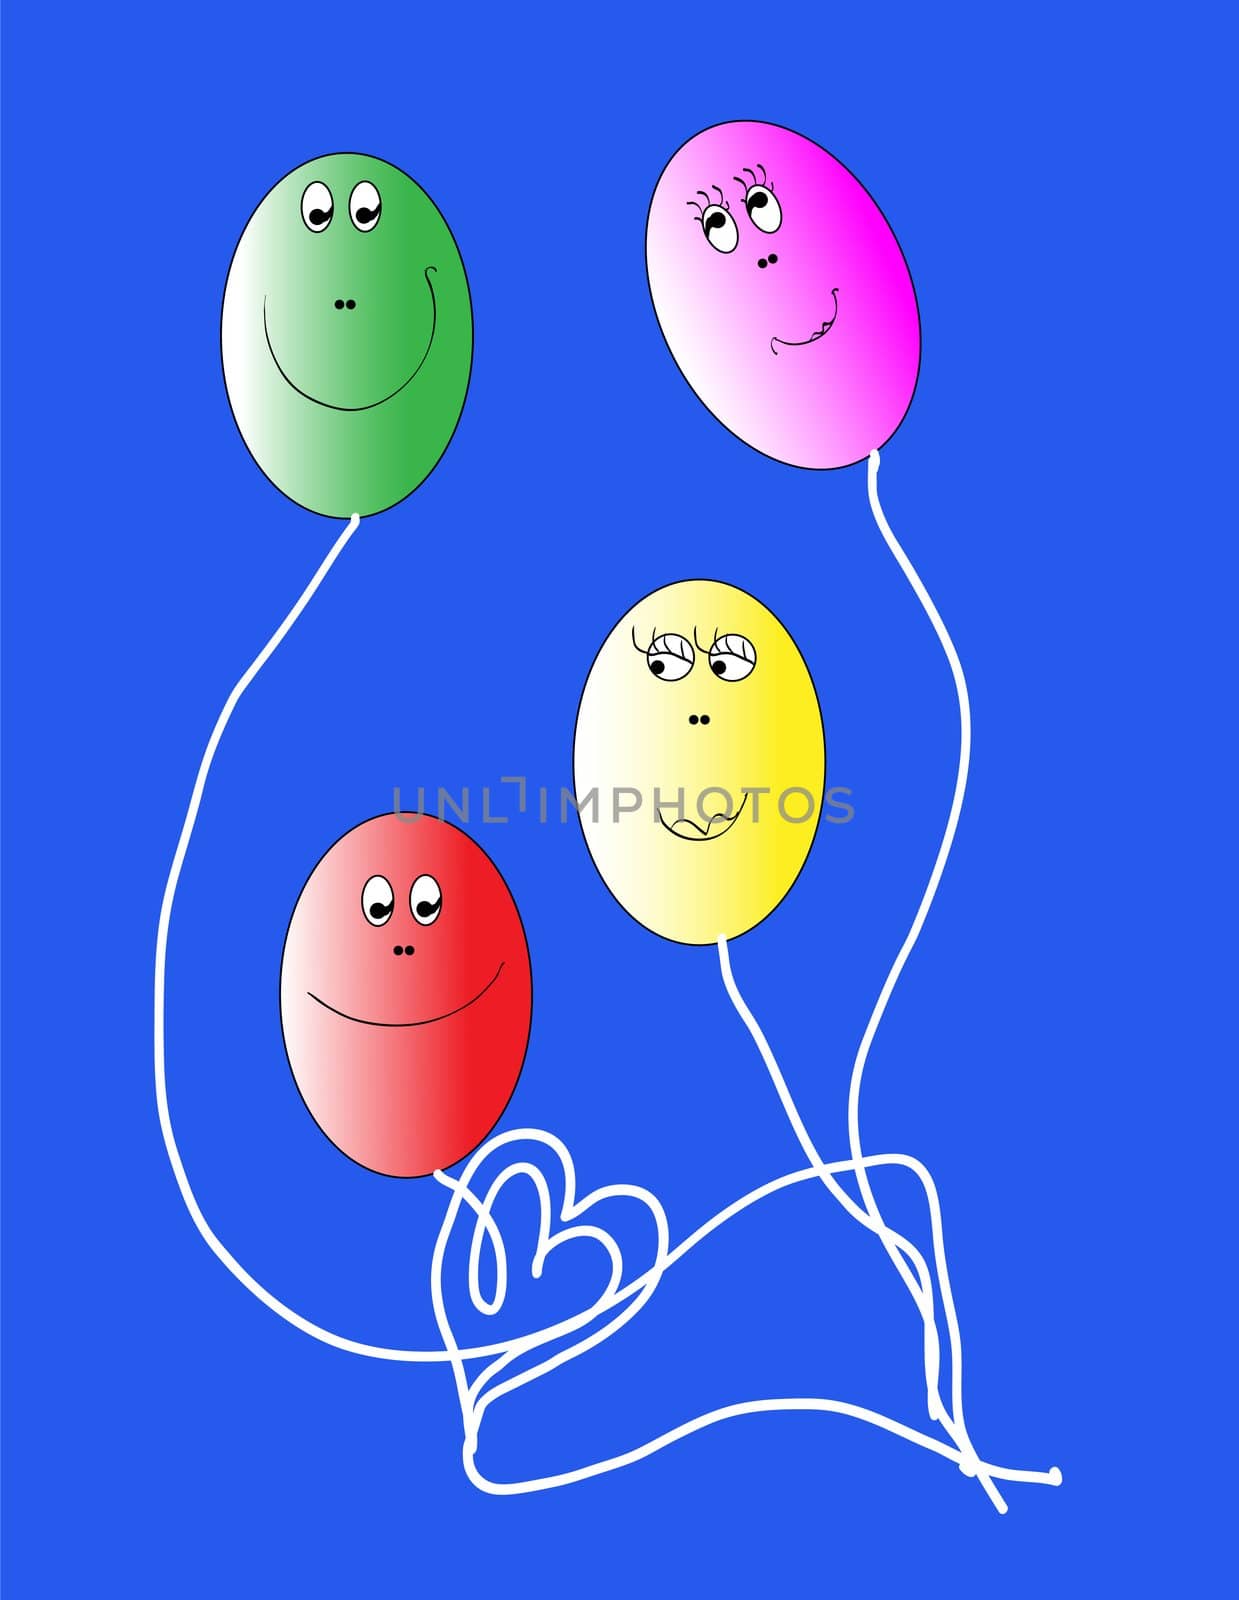 Eggs are colored like a balloon by Larisa13